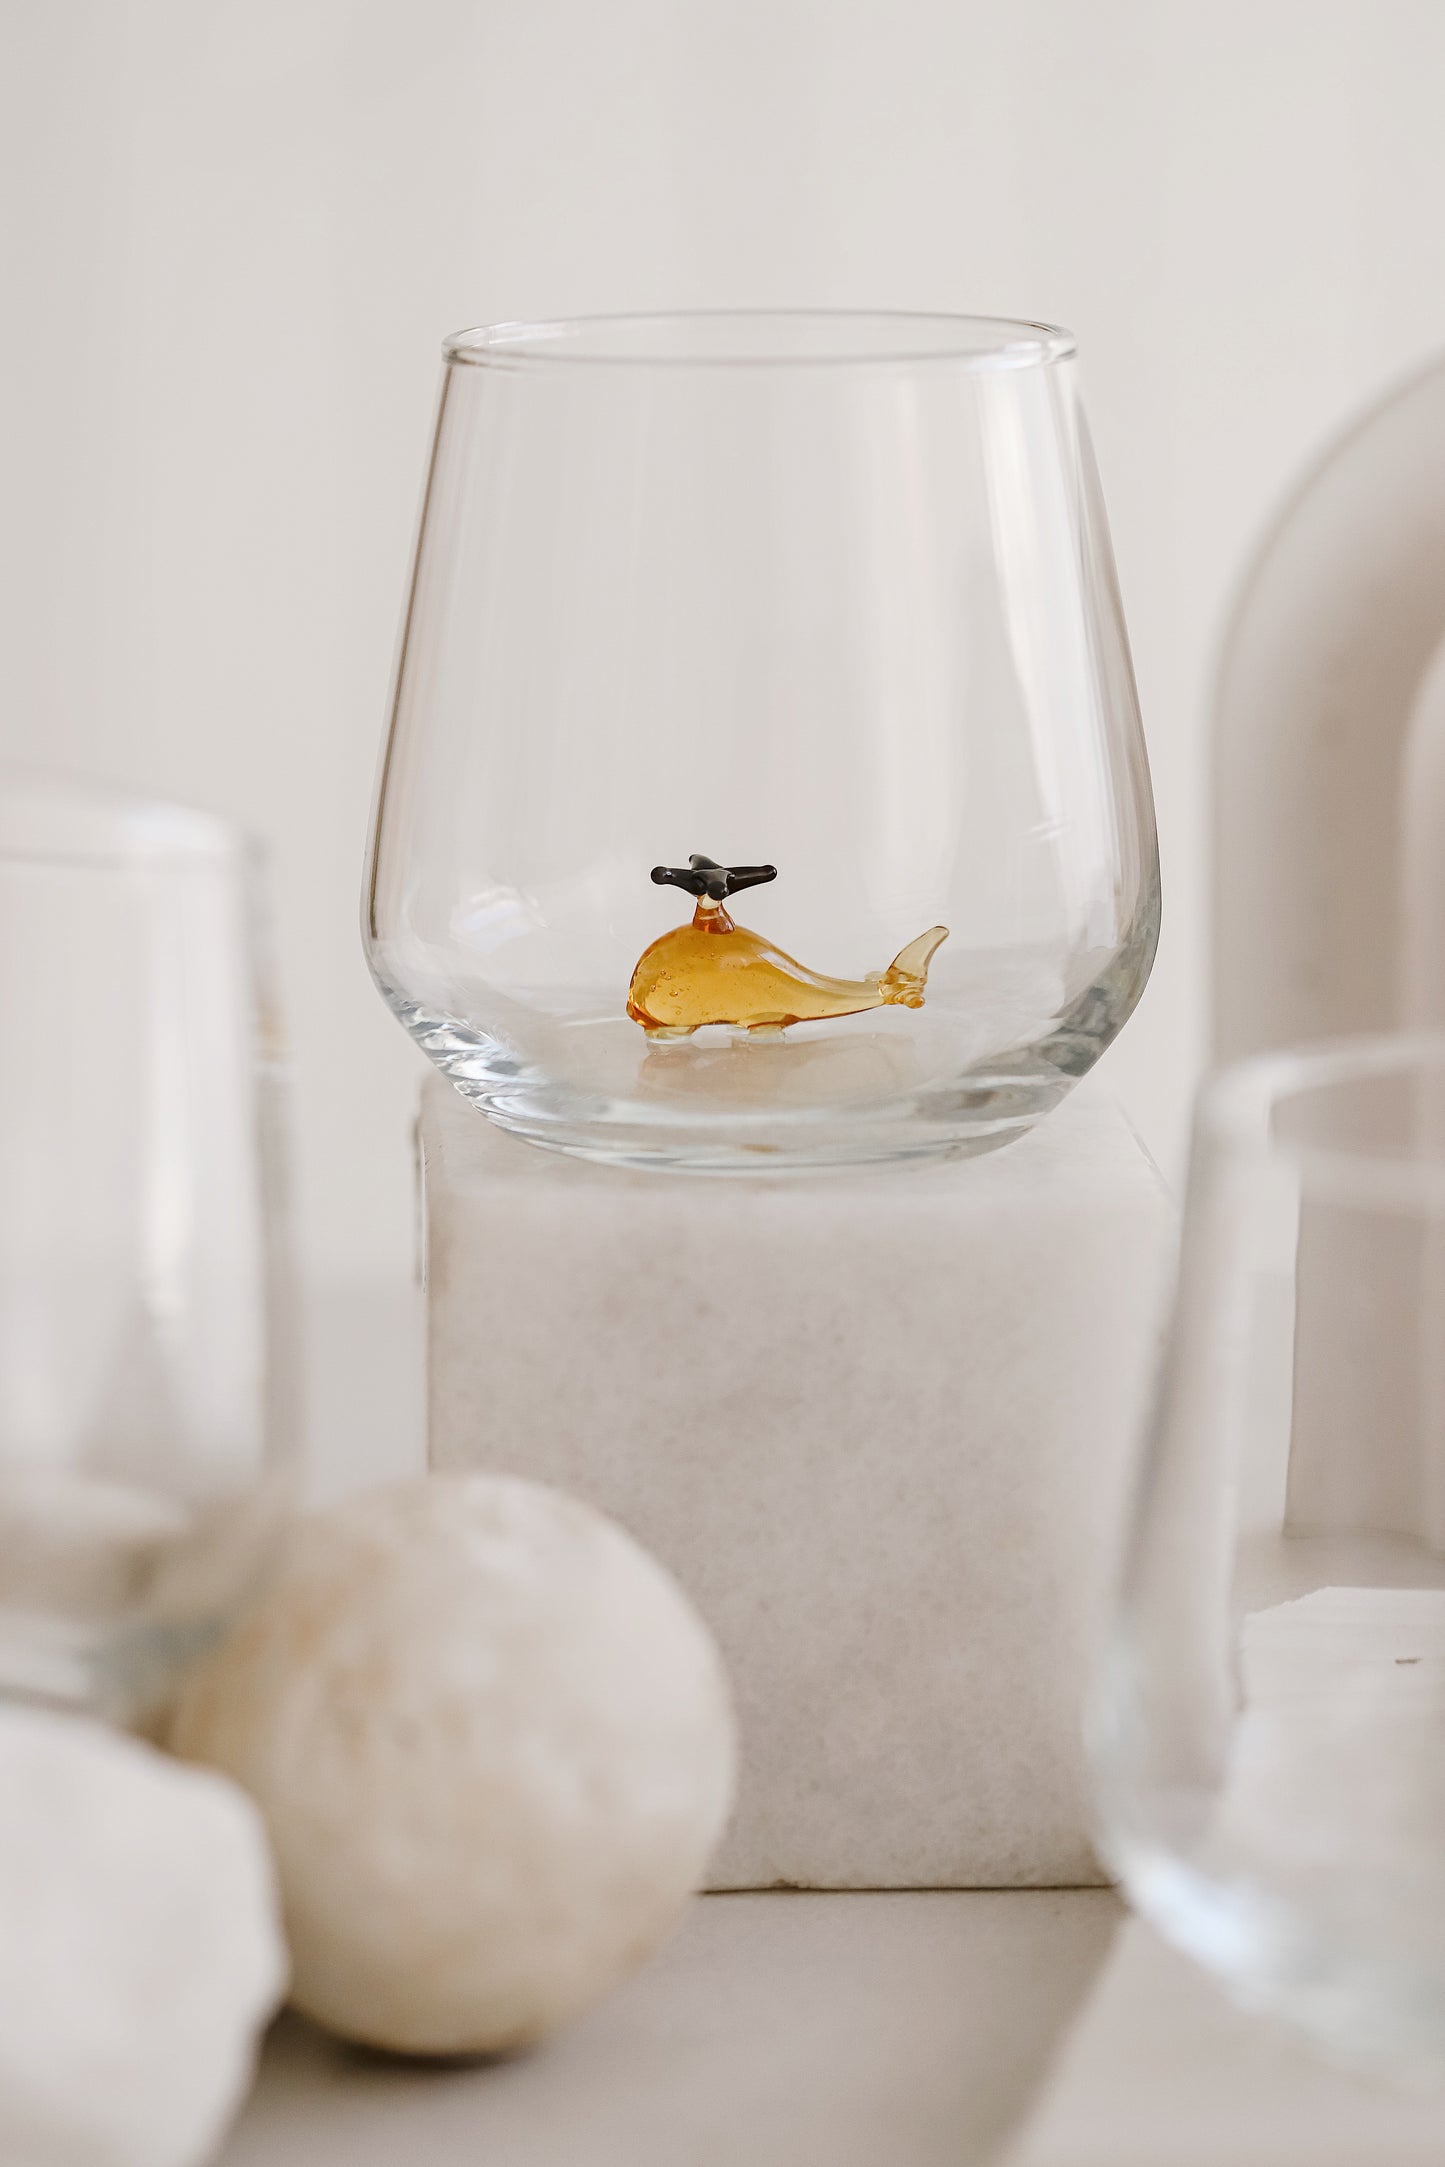 Tiny Figurine Drinking Glass, Helicopter